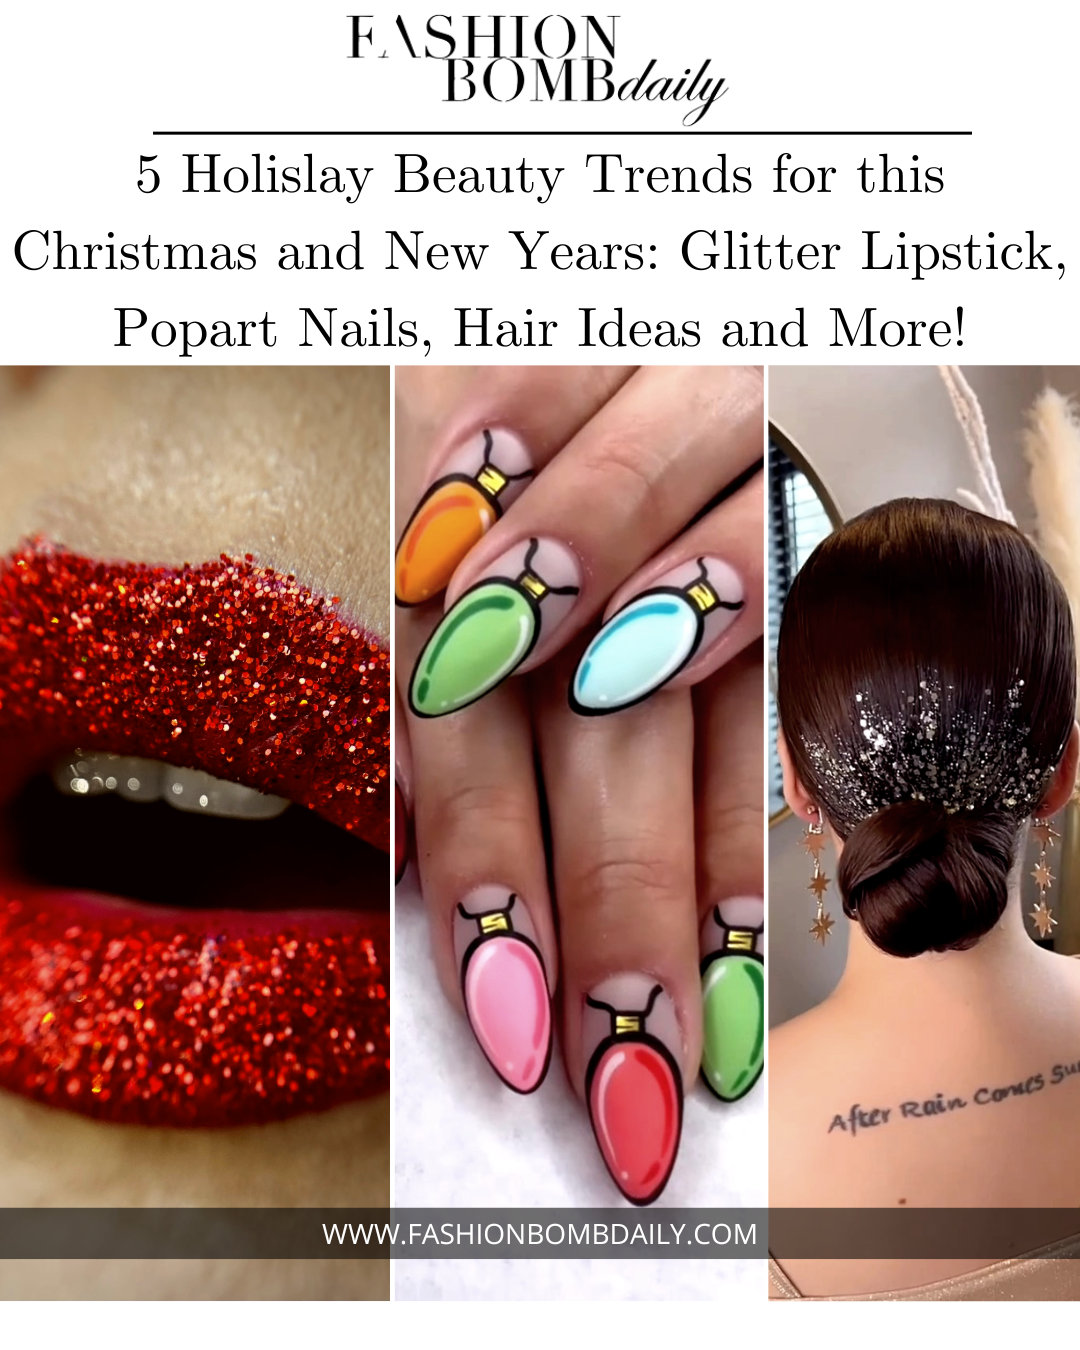 5 Holislay Beauty Trends for this Christmas and New Years Glitter Lipstick Popart Nails Hair Ideas and More